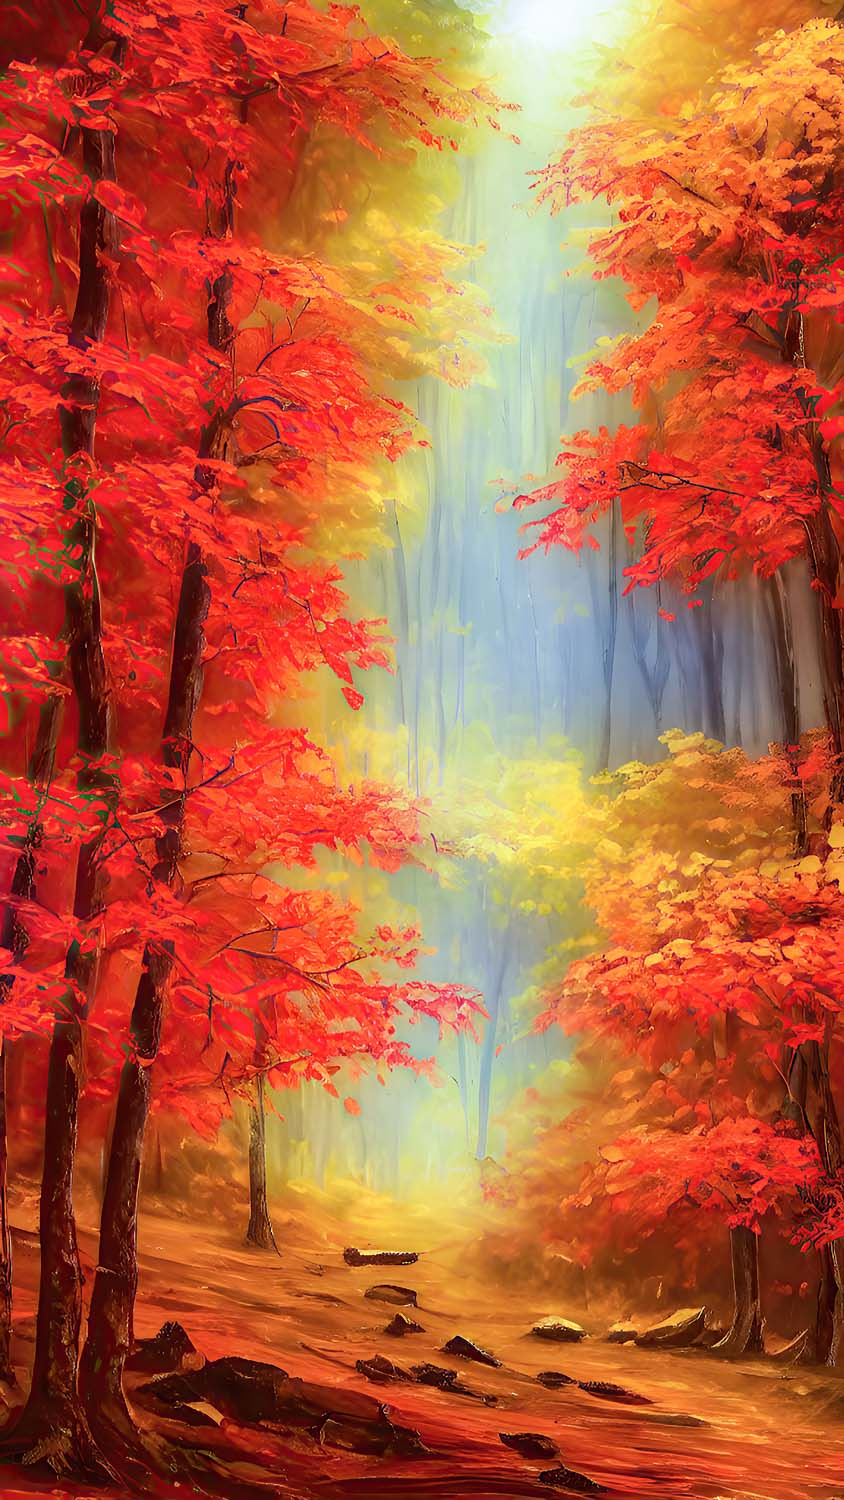 Autumn Forest Painting IPhone Wallpaper HD  IPhone Wallpapers